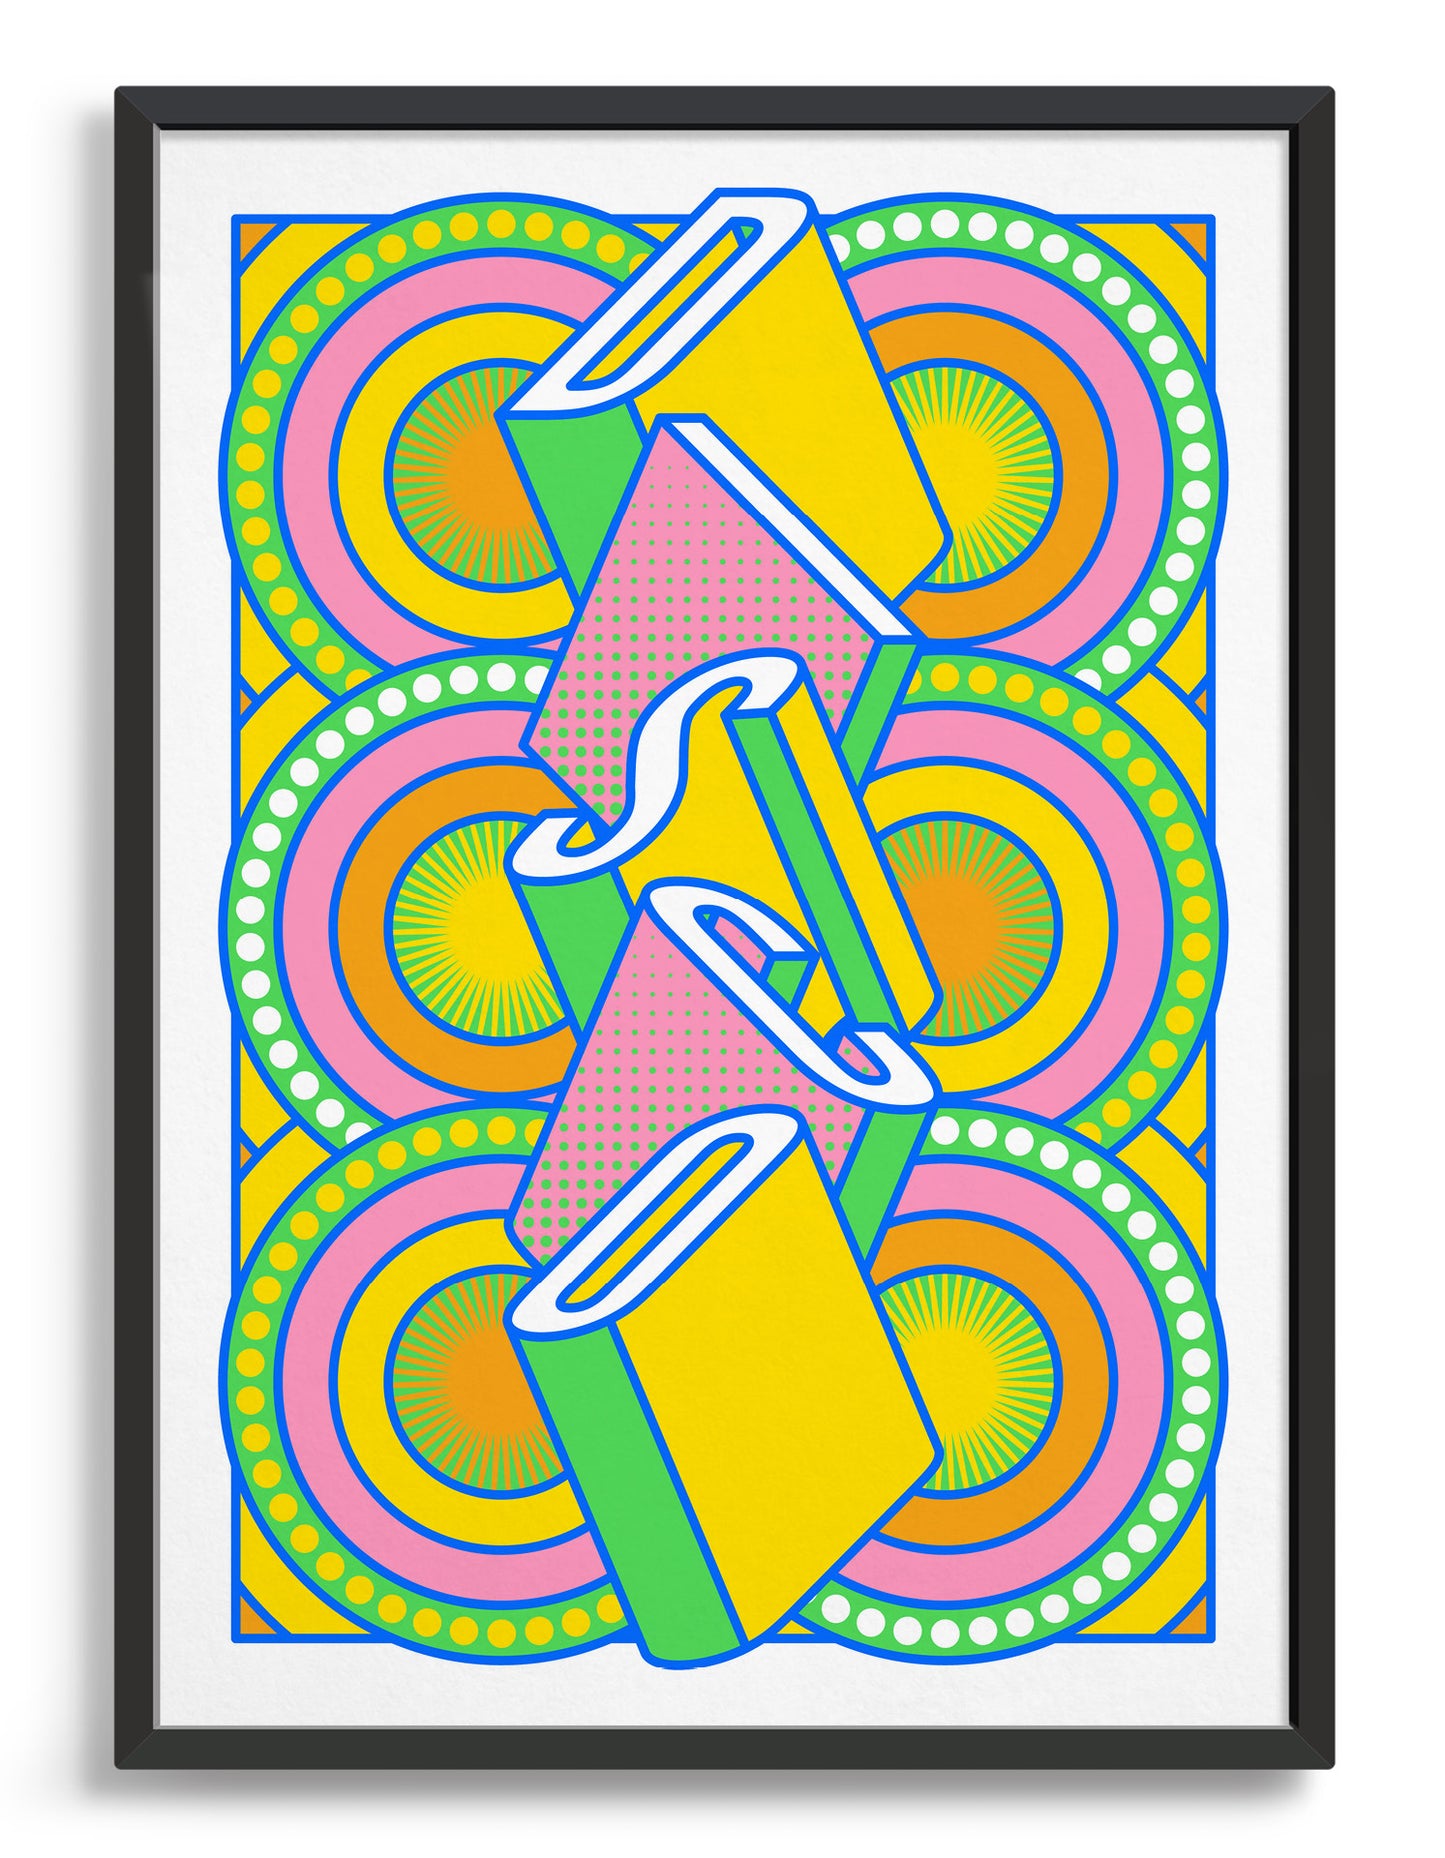 disco music art print featuring a geometric abstract pattern in bold shapes and vibrant colours. Block typography depicts the word disco in tumbling text